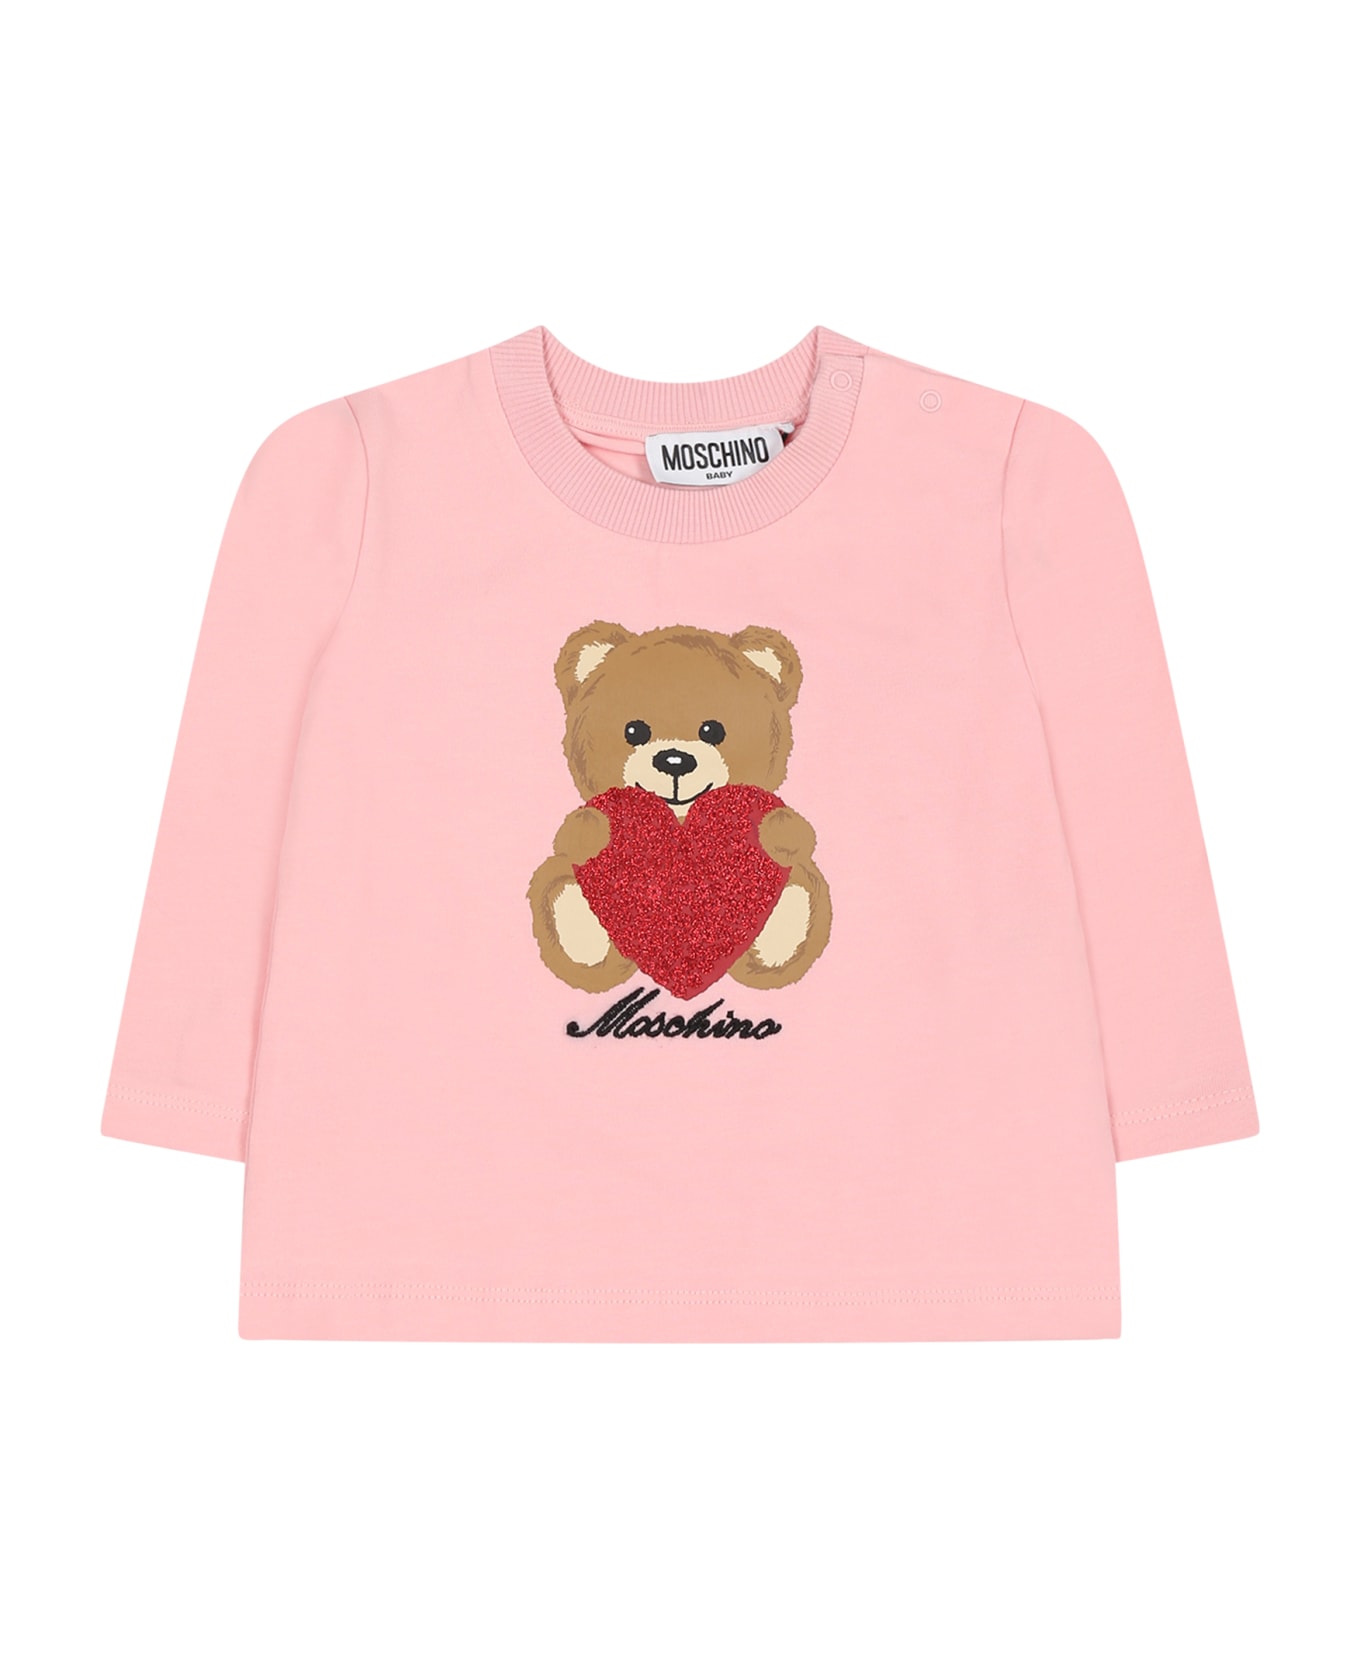 Moschino Pink T-shirt For Baby Girl With Teddy Bear And Logo - Pink